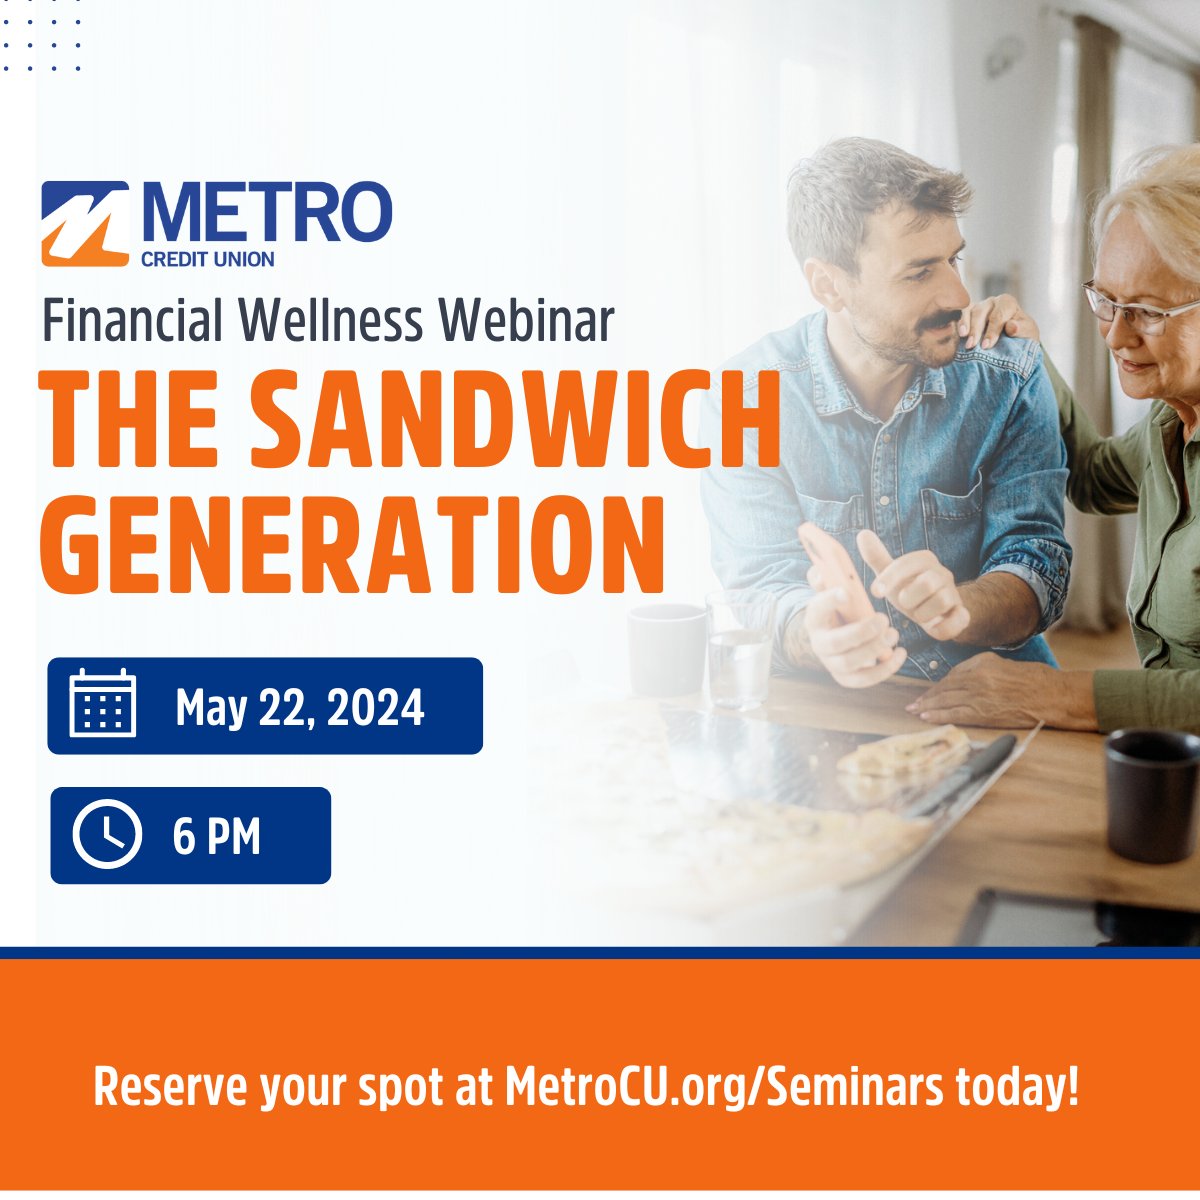 Are you part of the #sandwichgeneration, balancing care for aging parents and at the same time supporting your own children? Please join us for a #freewebinar on how to both manage parents’ needs AND remain financially prepared for your kids’ future: ow.ly/CHlk50RFVOx